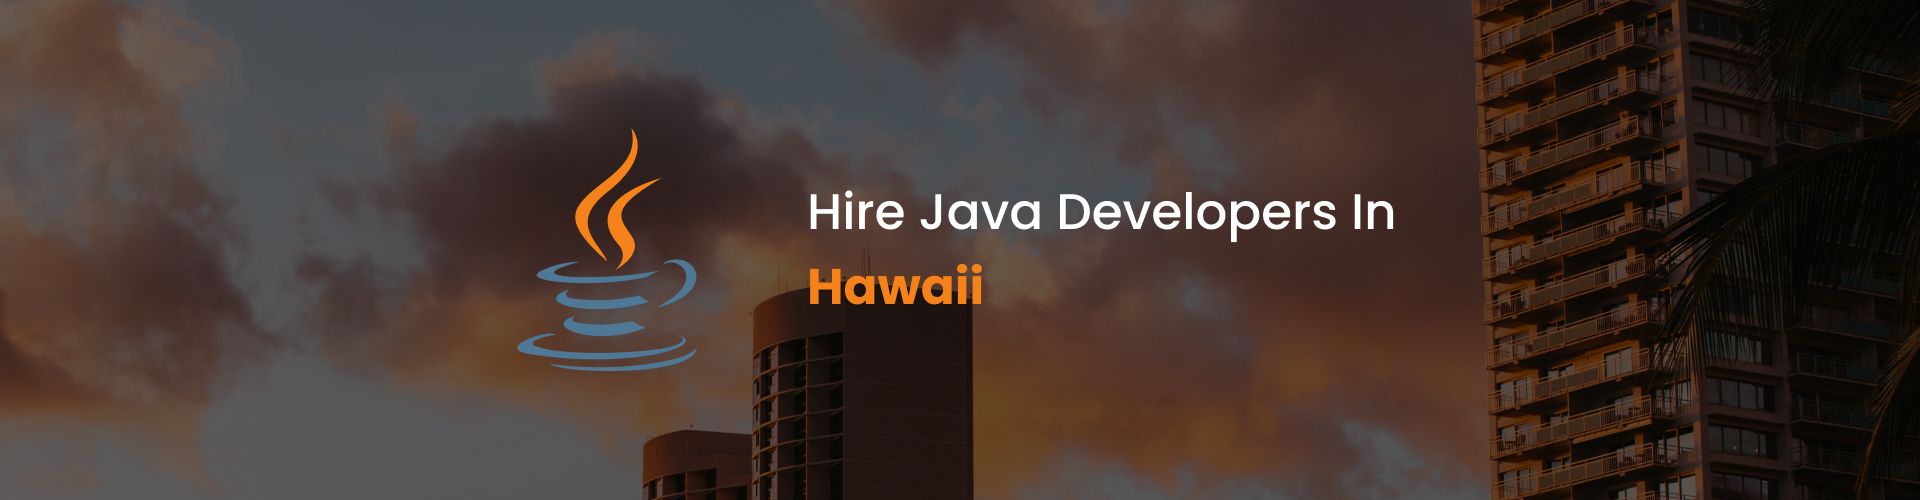 hire java developers in hawaii